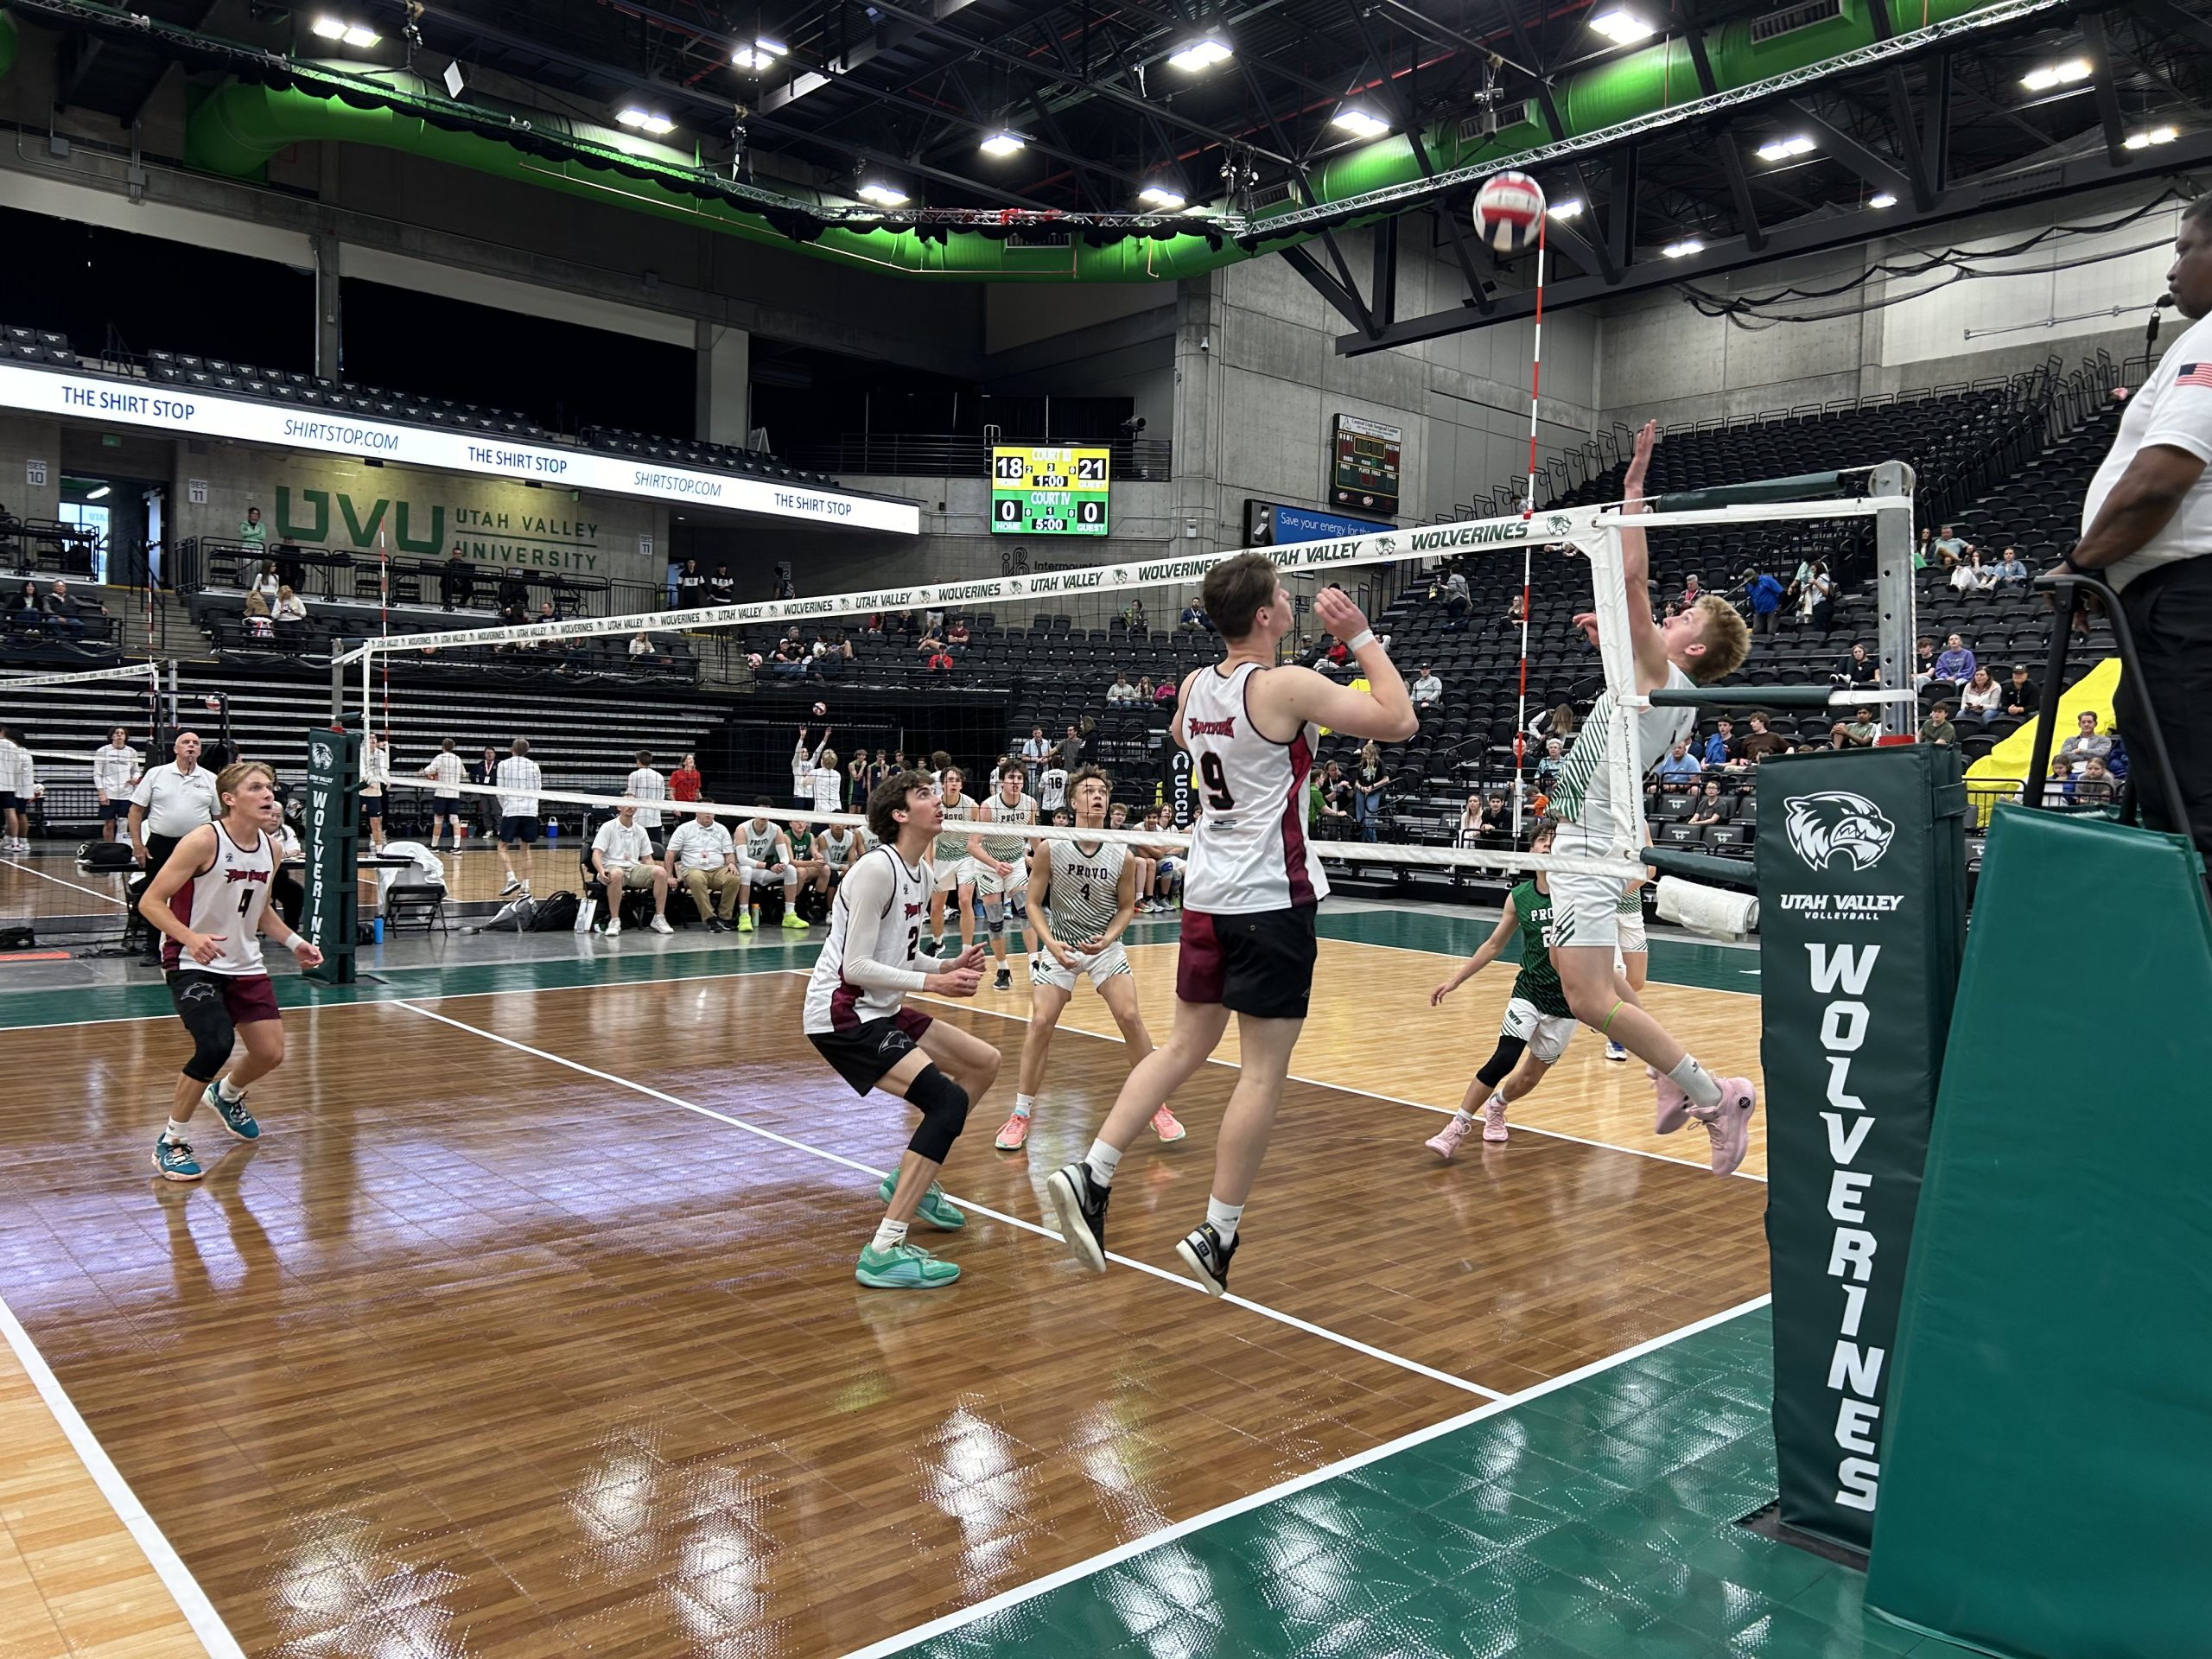 Pine View upsets top-seeded Orem to win inaugural 4A boys volleyball state title